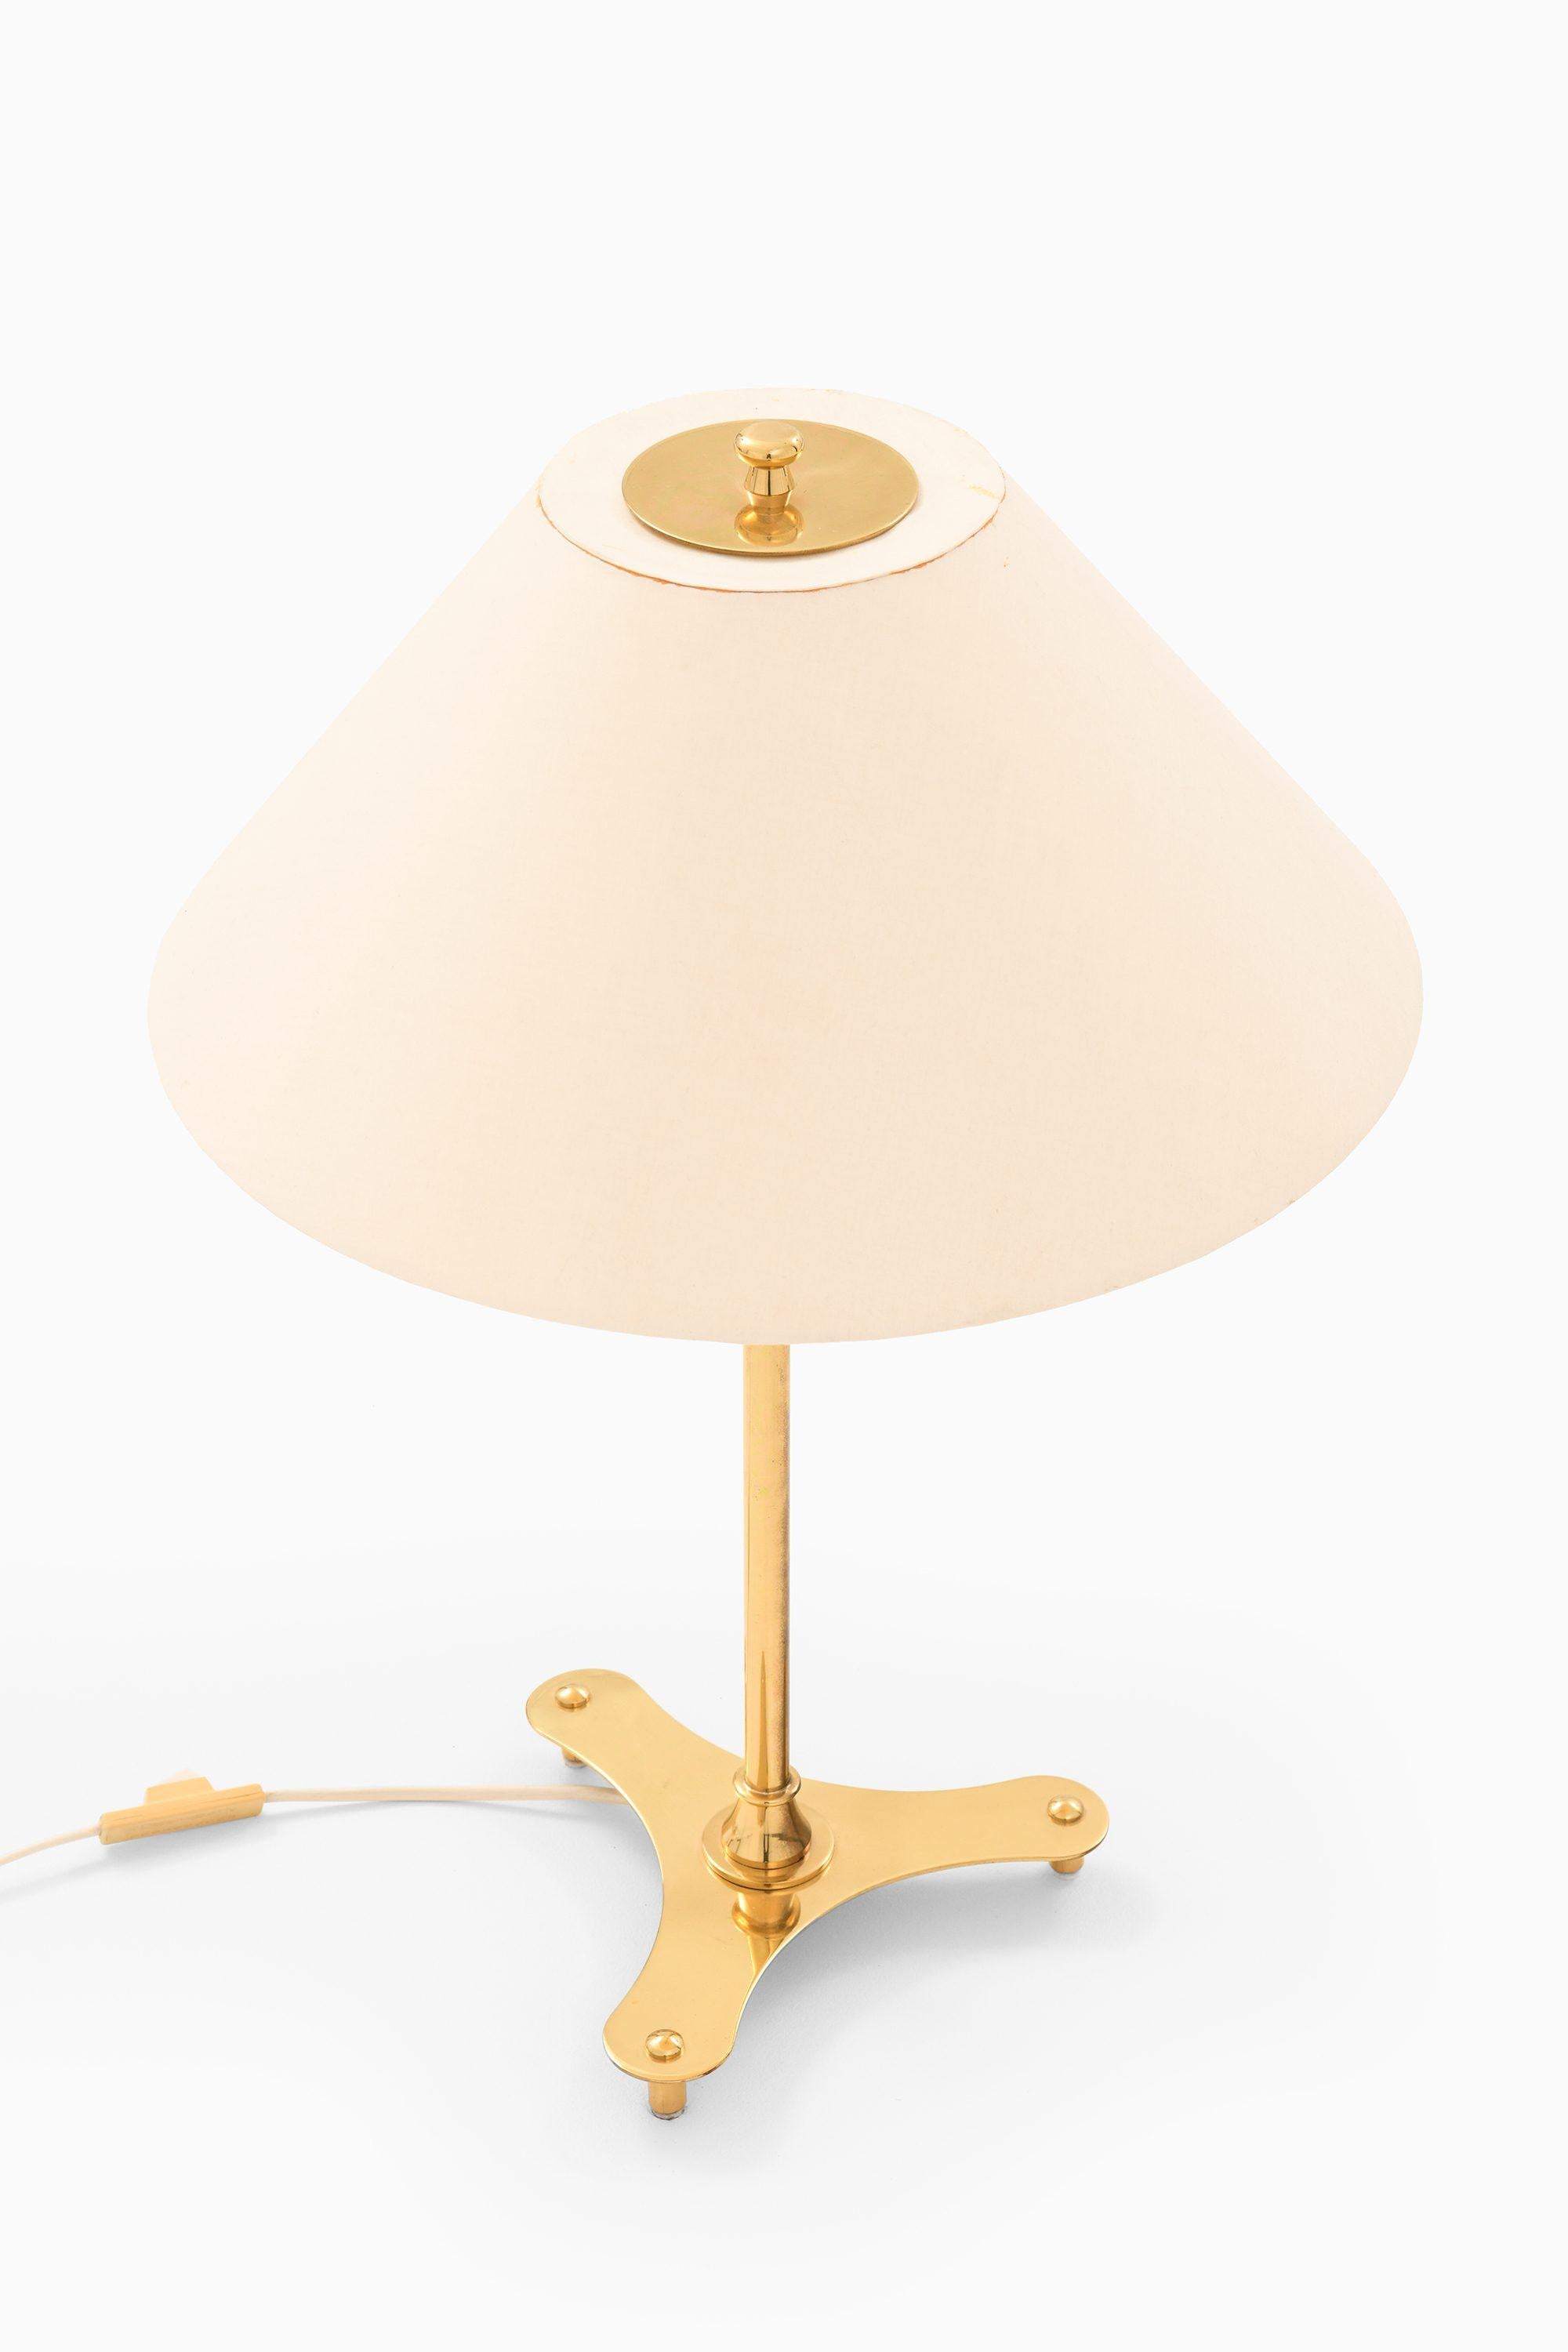 Table Lamp in Brass and Original Lamp Shade by Josef Frank, 1960's

Additional Information:
Material: Brass and original lamp shade
Style: Mid century, Scandinavian
Rare table lamp model 2467
Produced by Svenskt Tenn in Sweden
Dimensions (W x D x